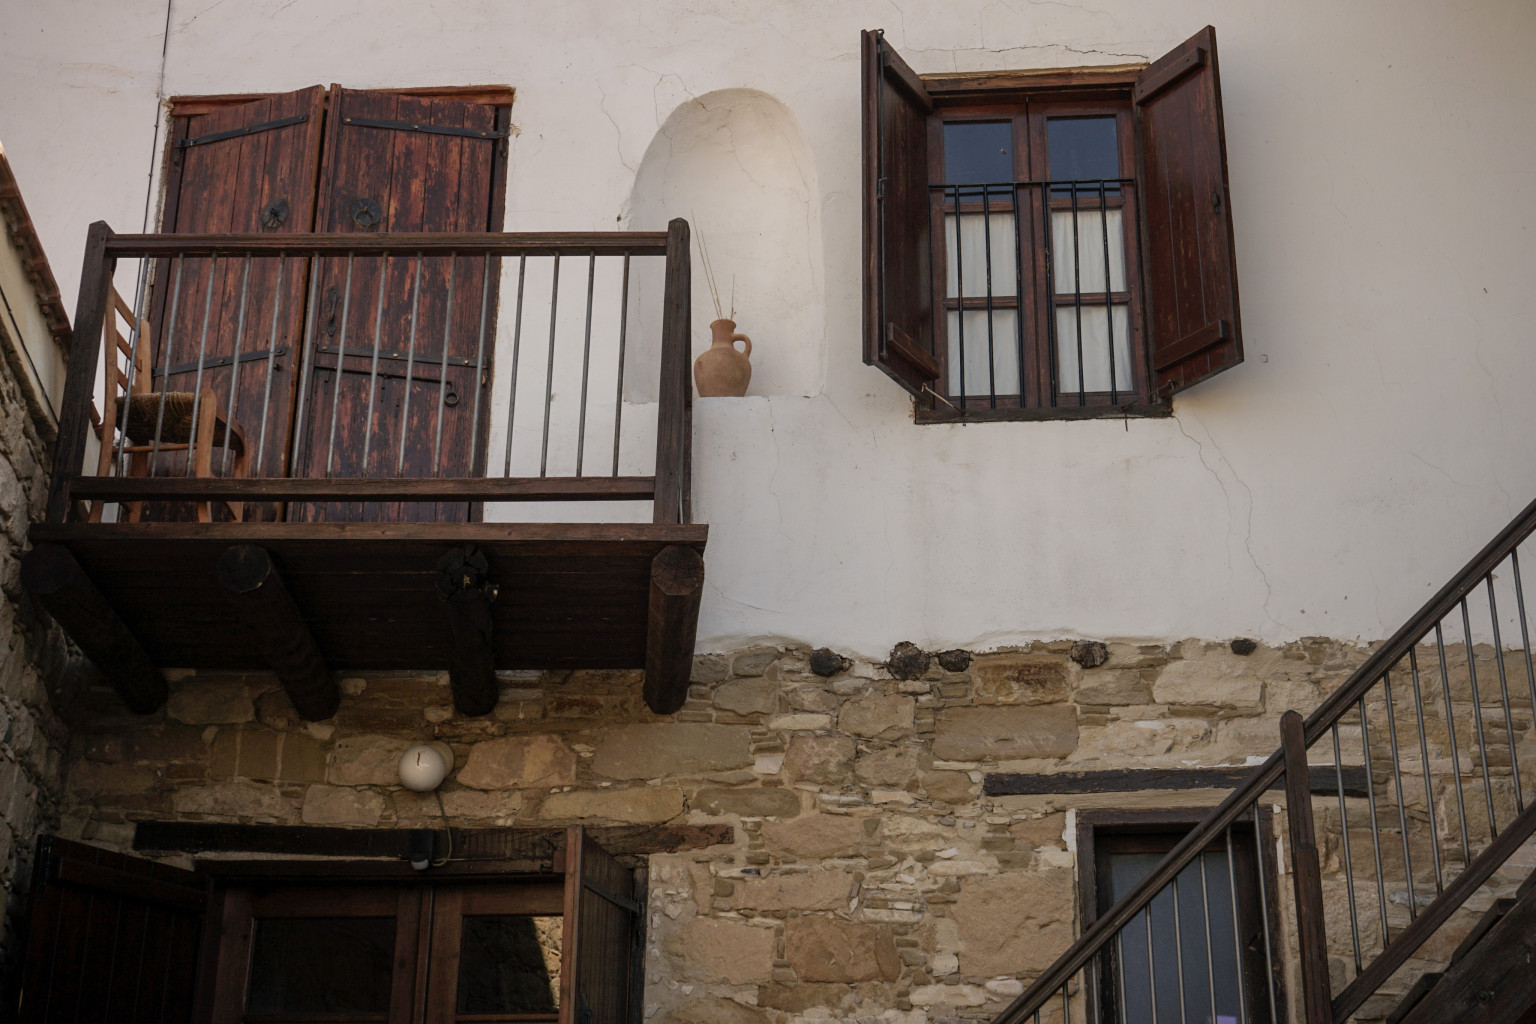 A traditional Cypriot-style balcony at the Teacher's House